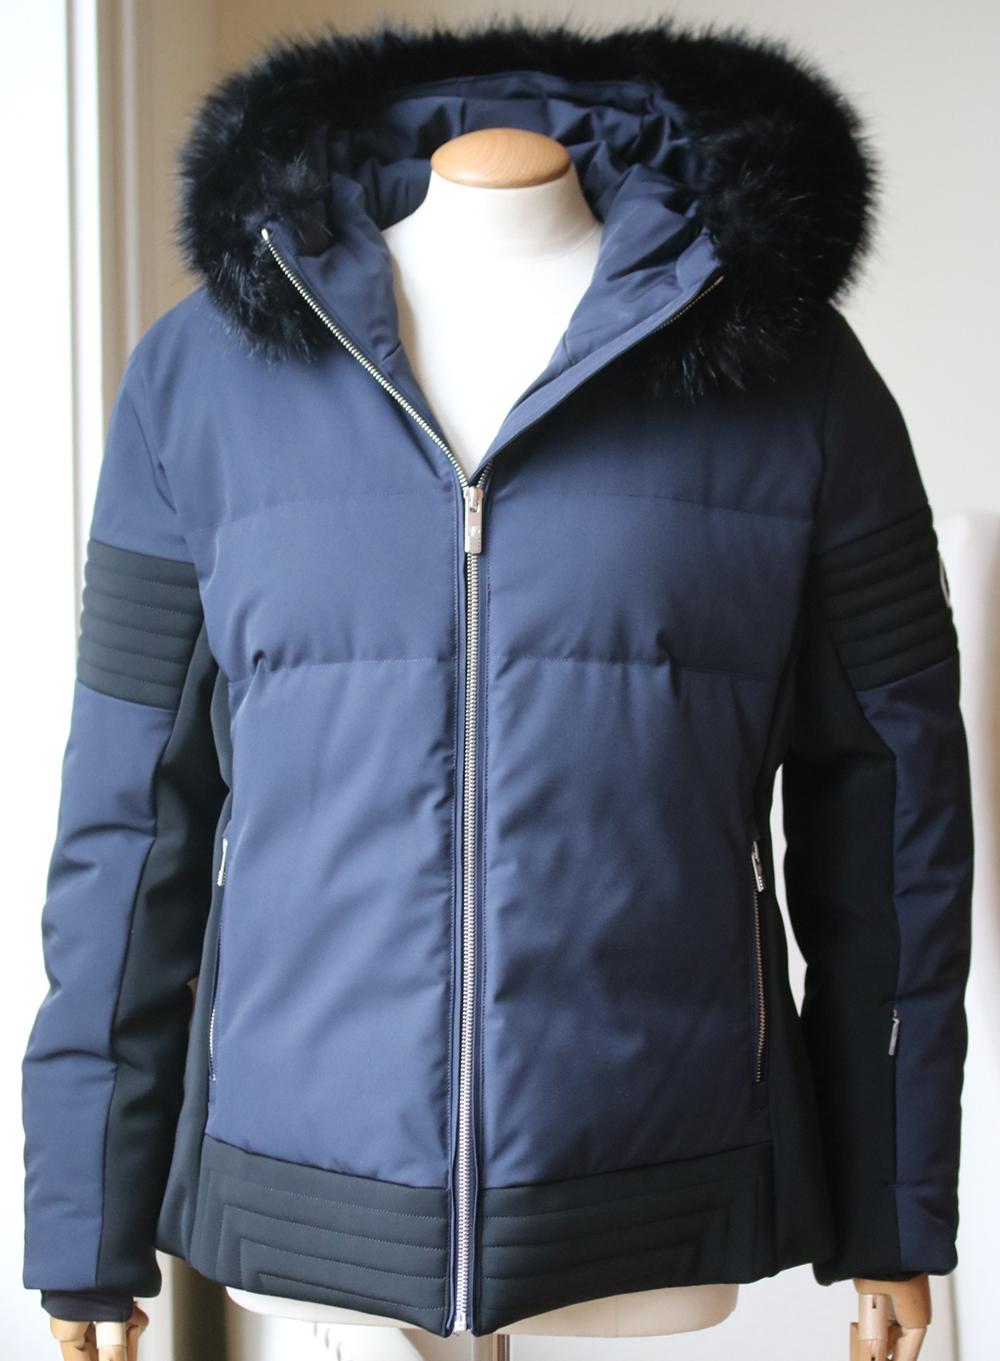 Make your mark on the mountain in Fusalp's Gardena III ski jacket in navy. Crafted from Perfortex technical fabric that offers water- and wind-resistance, the design is insulated with down fill. The faux-fur-trimmed hood will keep you extra warm,